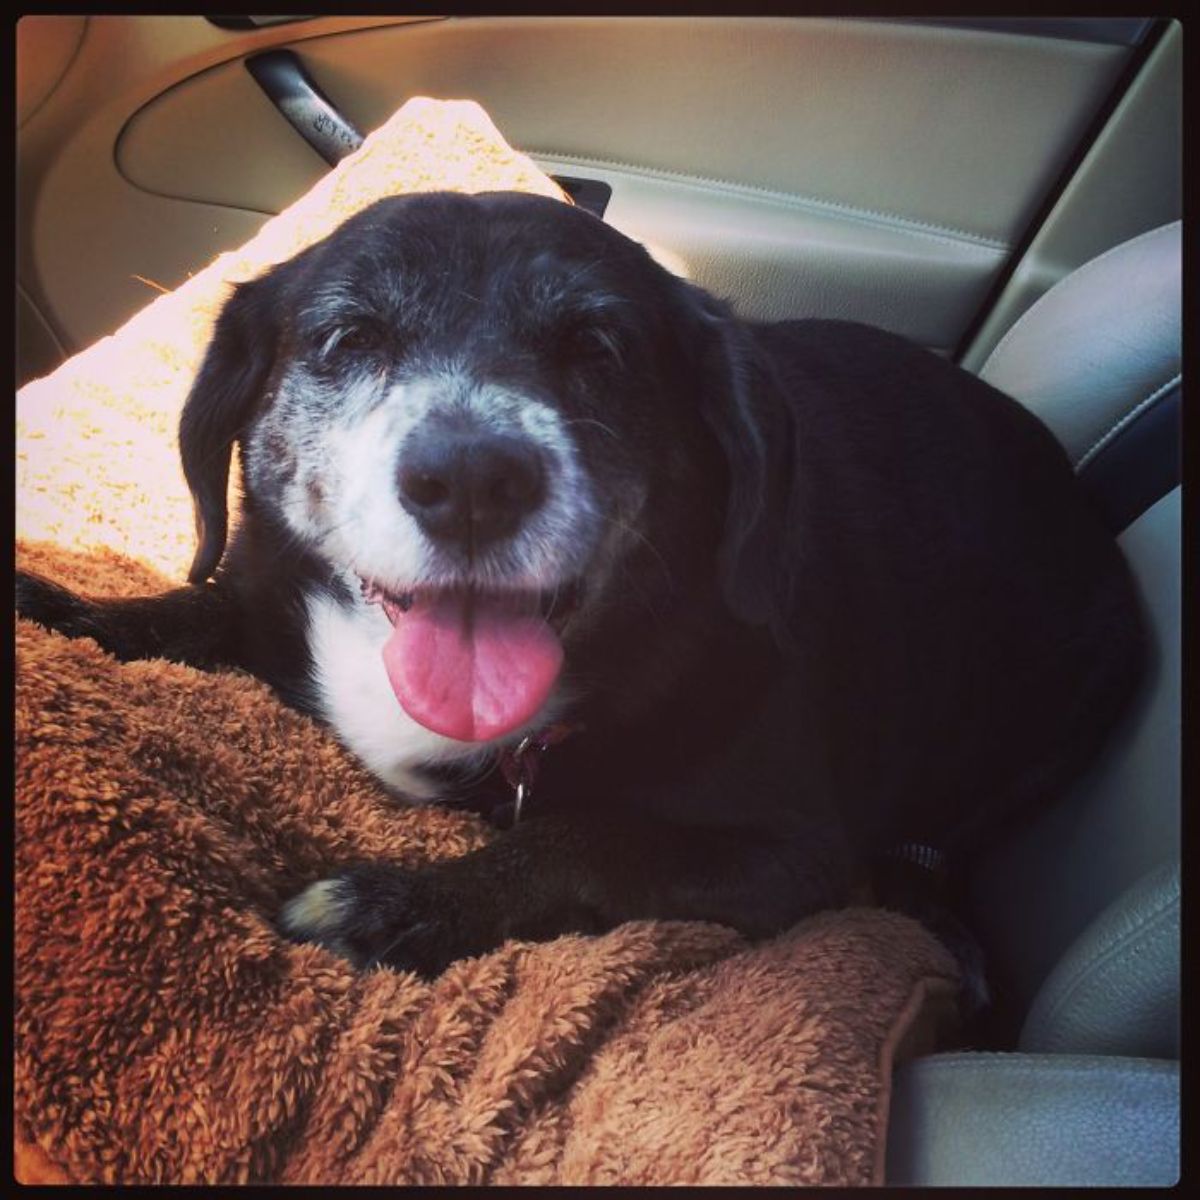 smiling old black dog laying on brown blankets in a car